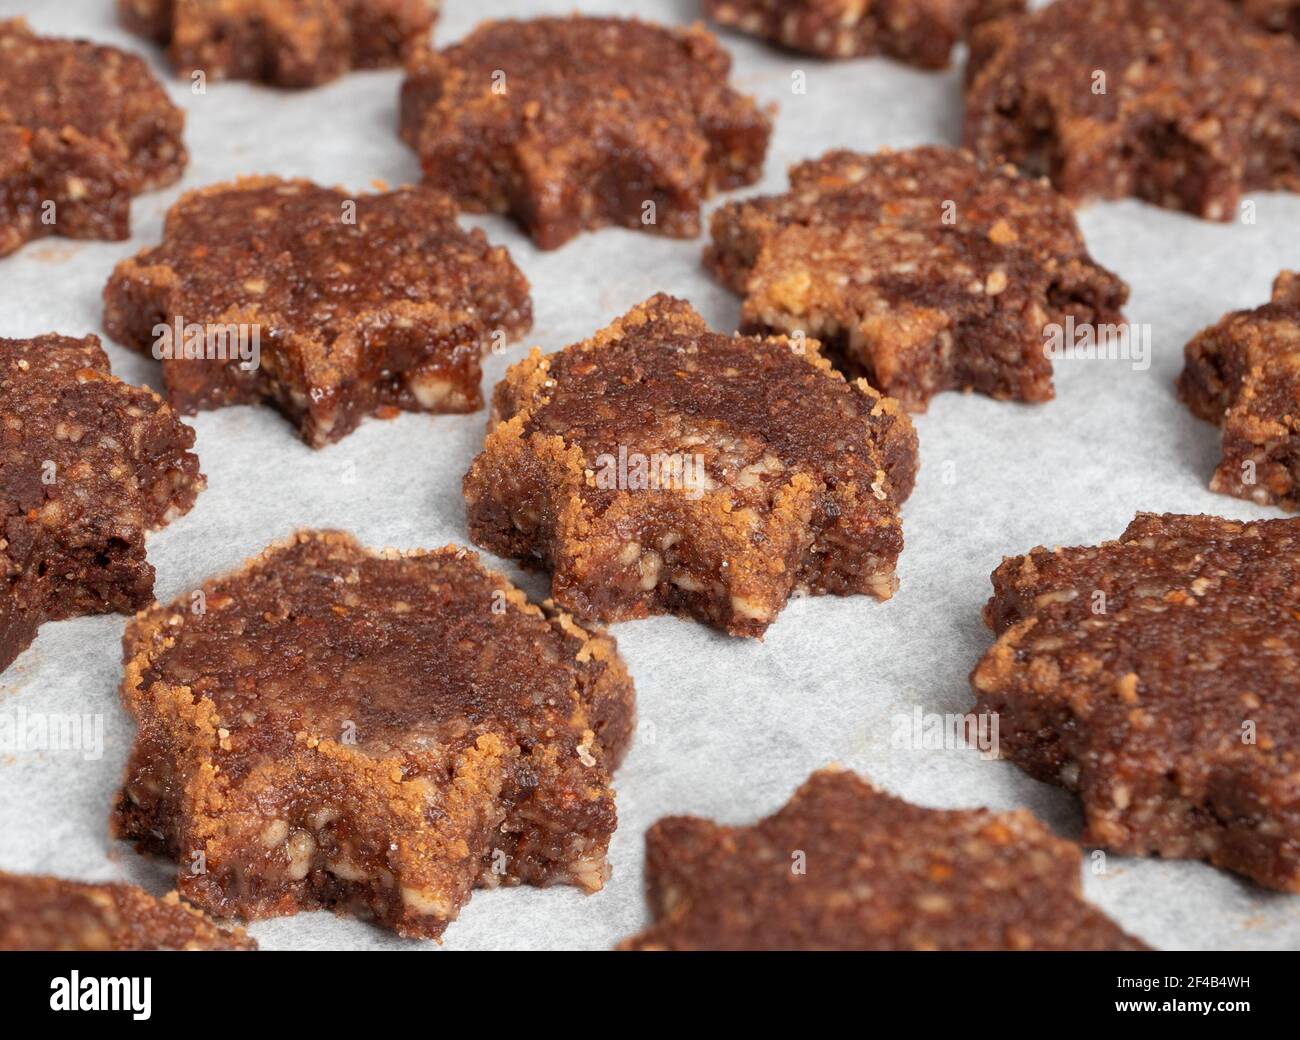 Rows of gluten free almond flour and chocolate cookie in shape of a star with sugar cinnamon rim, ready to be baked. Swiss recipe 'Basler Brunsli'. GF Stock Photo